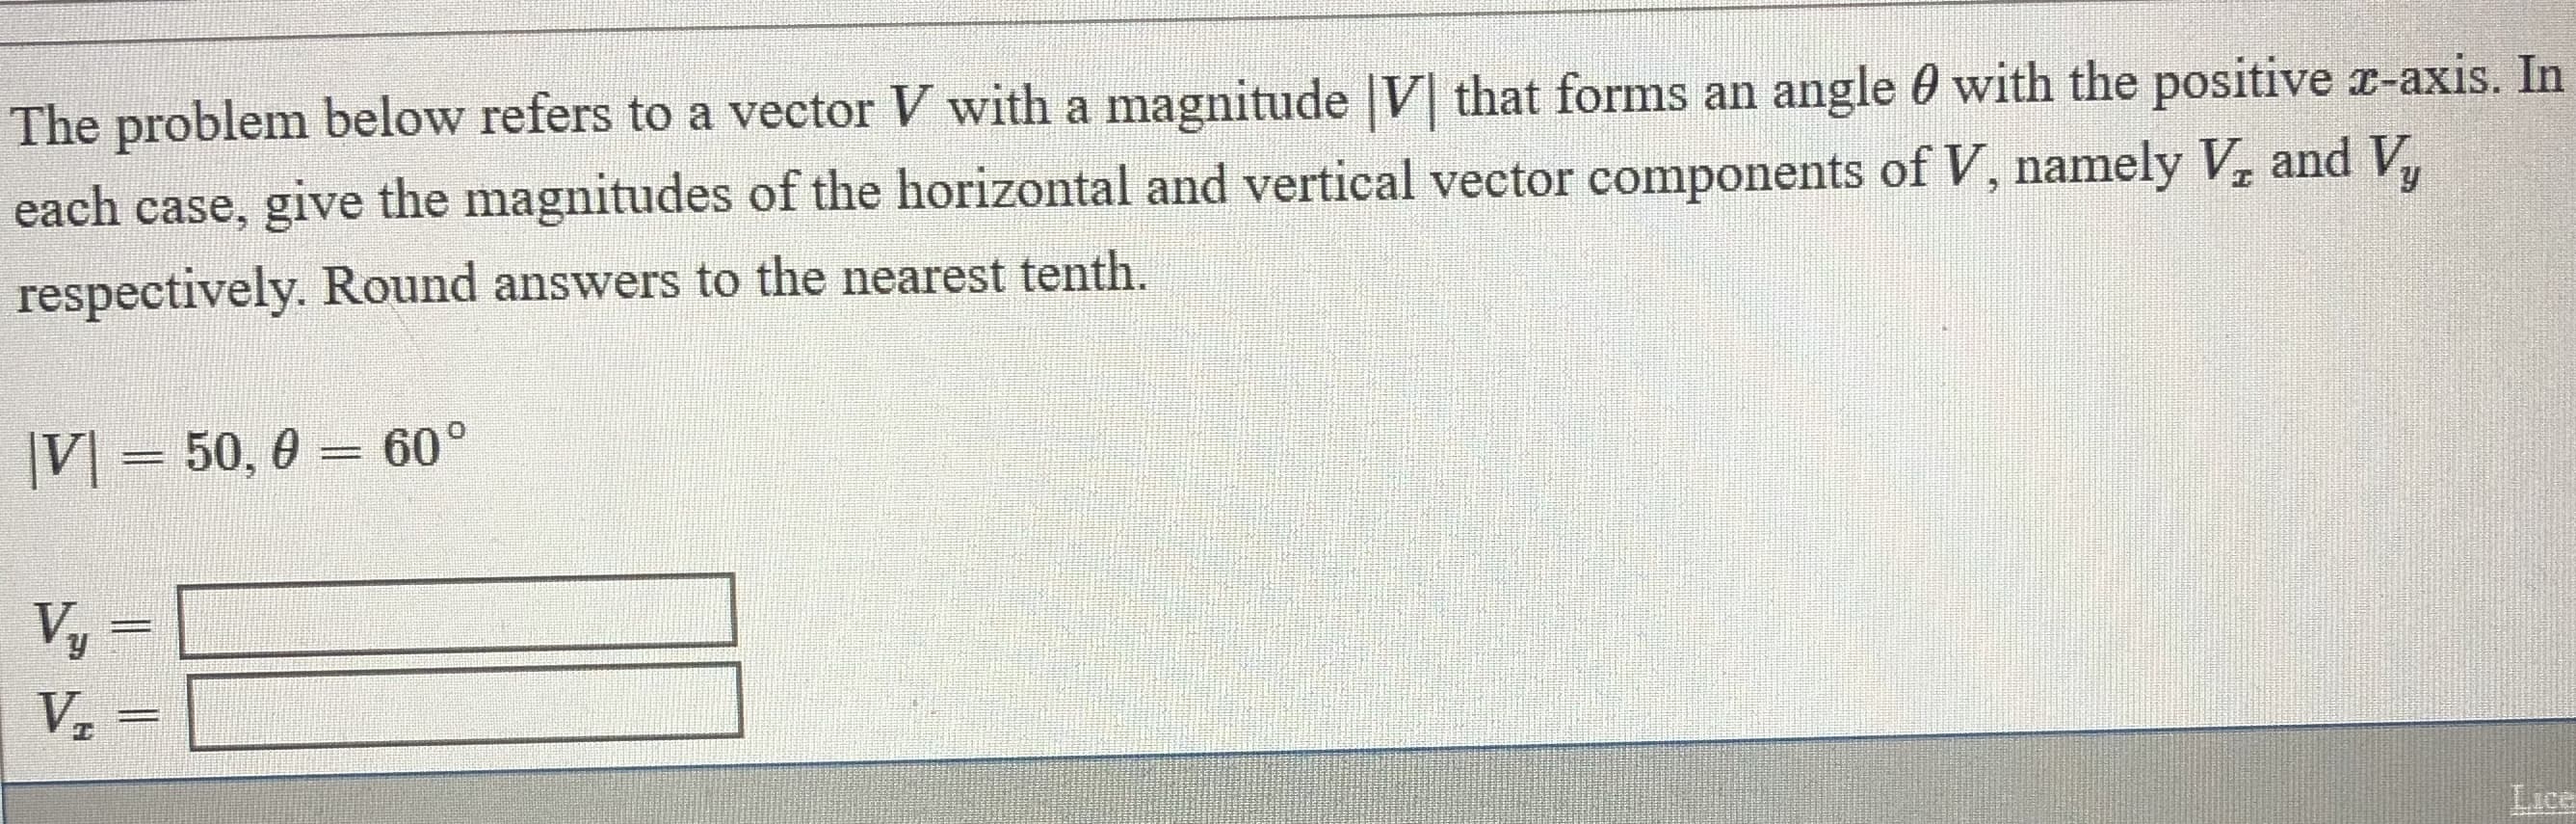 The problem below refers to a vector V with a magnitude |V that forms an angle 0 with the positive x-axis. In
each case, give the magnitudes of the horizontal and vertical vector components of V, namely V, and V,
respectively. Round answers to the nearest tenth.
|V] = 50, 0
60°
%3D
%3D
